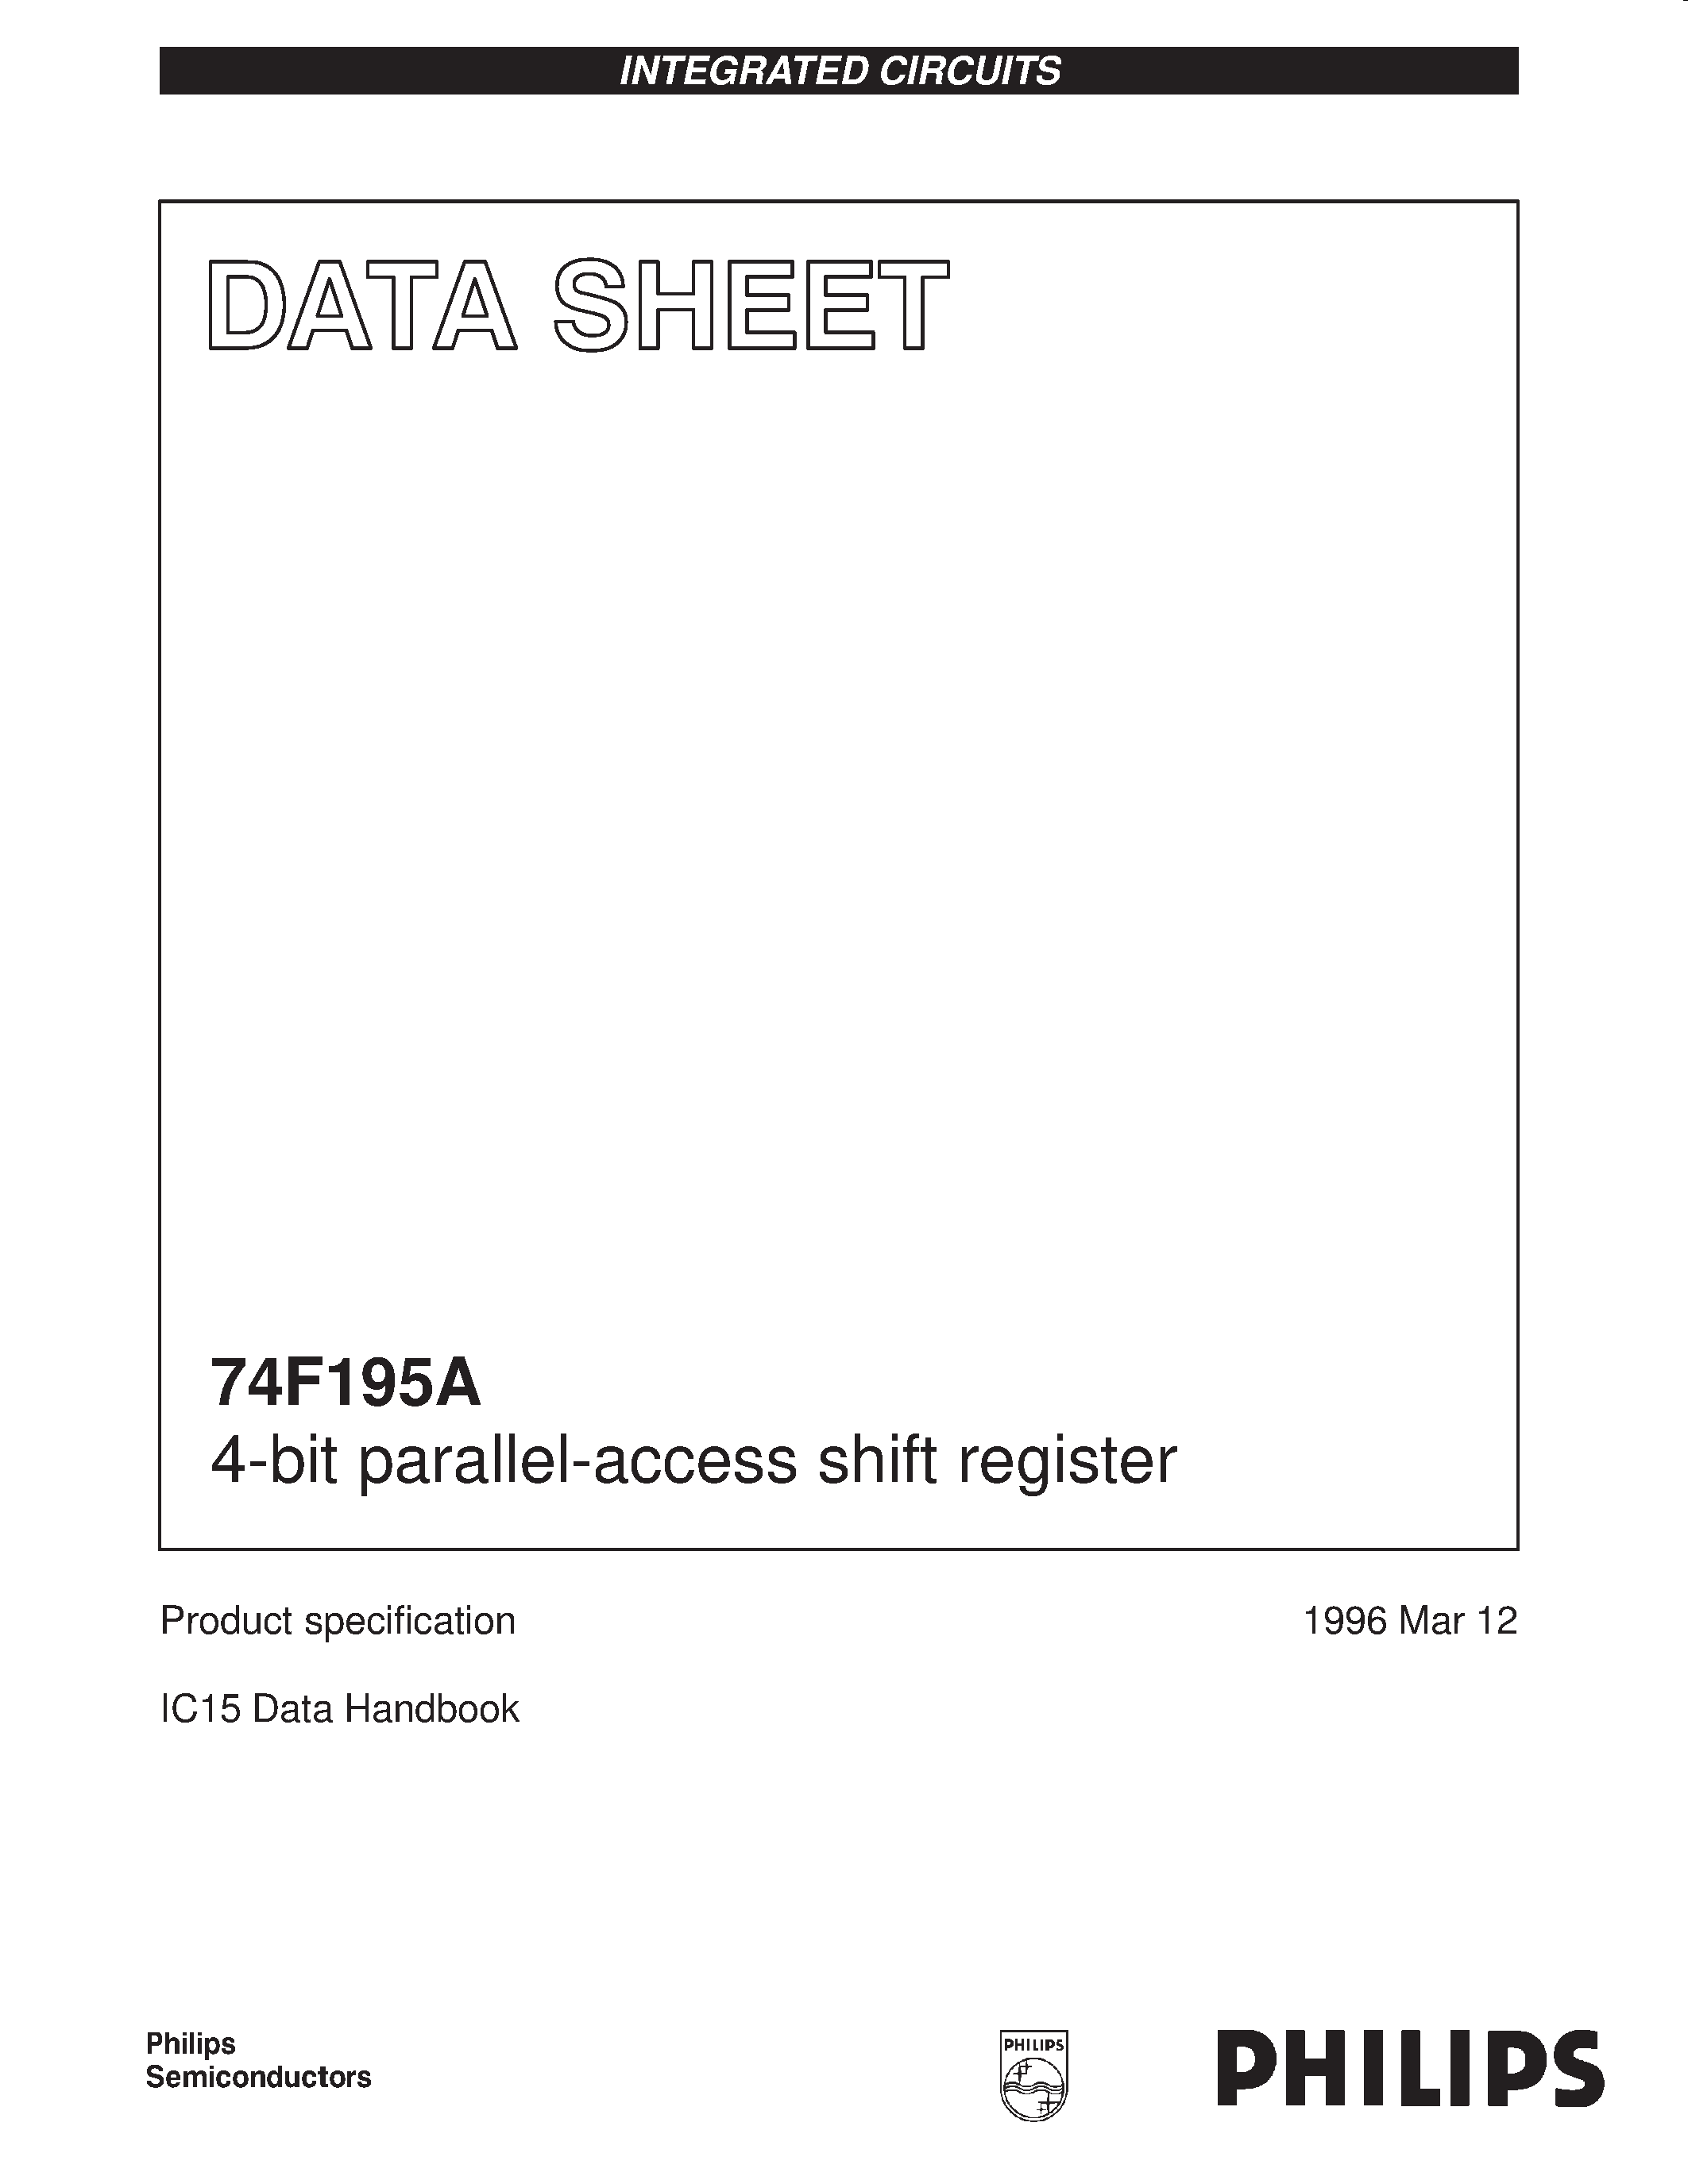 Datasheet 74F195A - 4-bit parallel-access shift register page 1